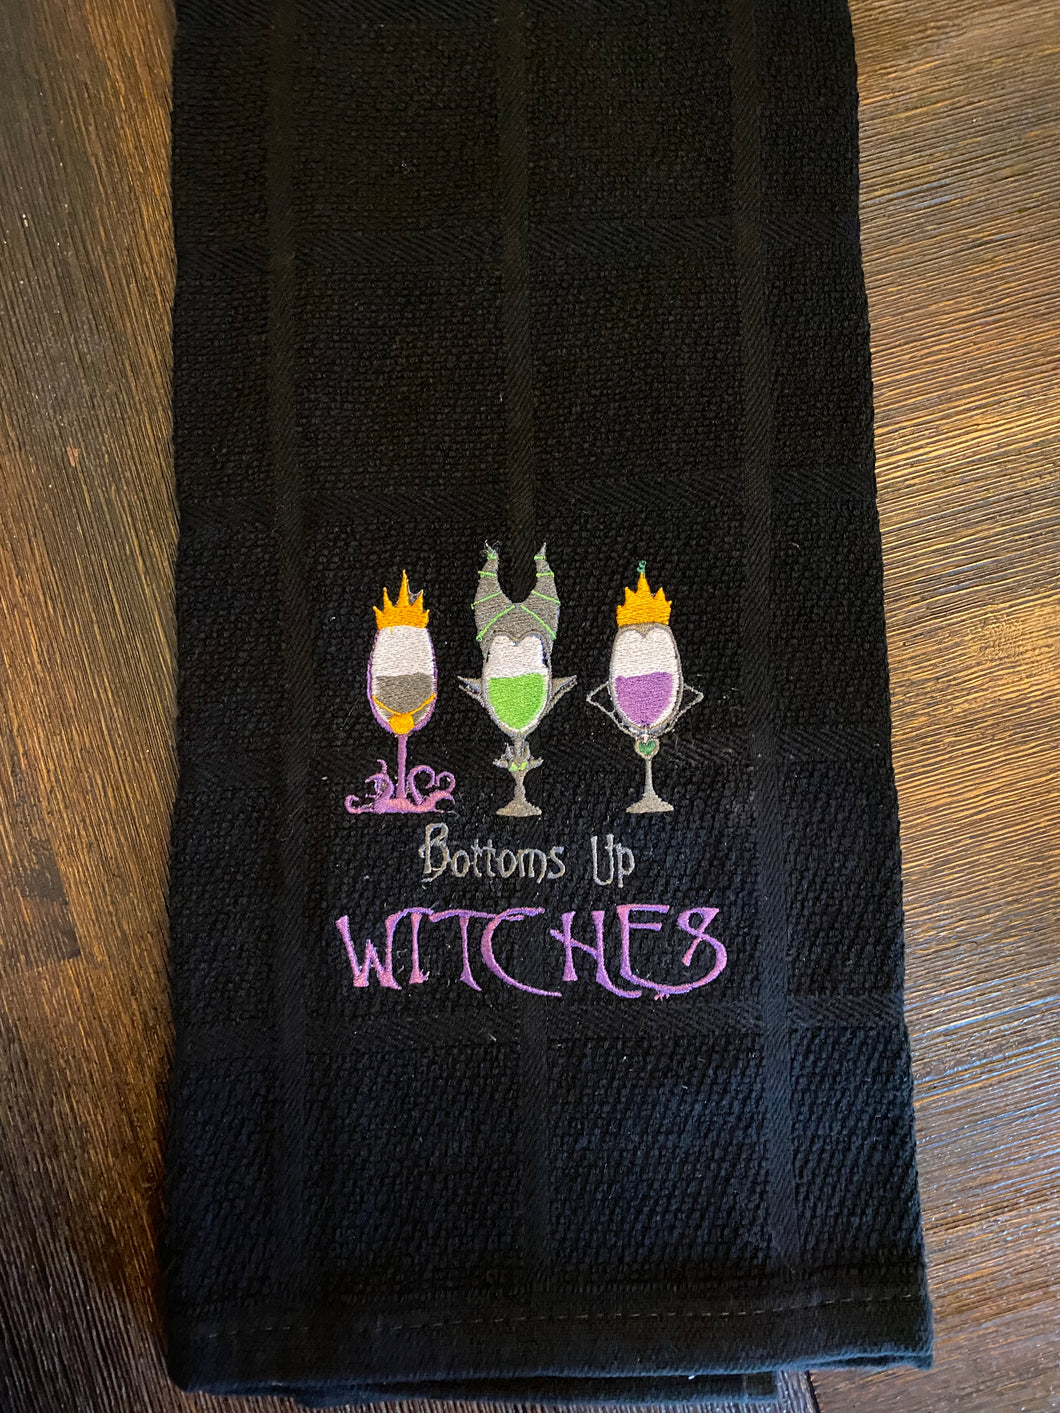 Cheers Witches